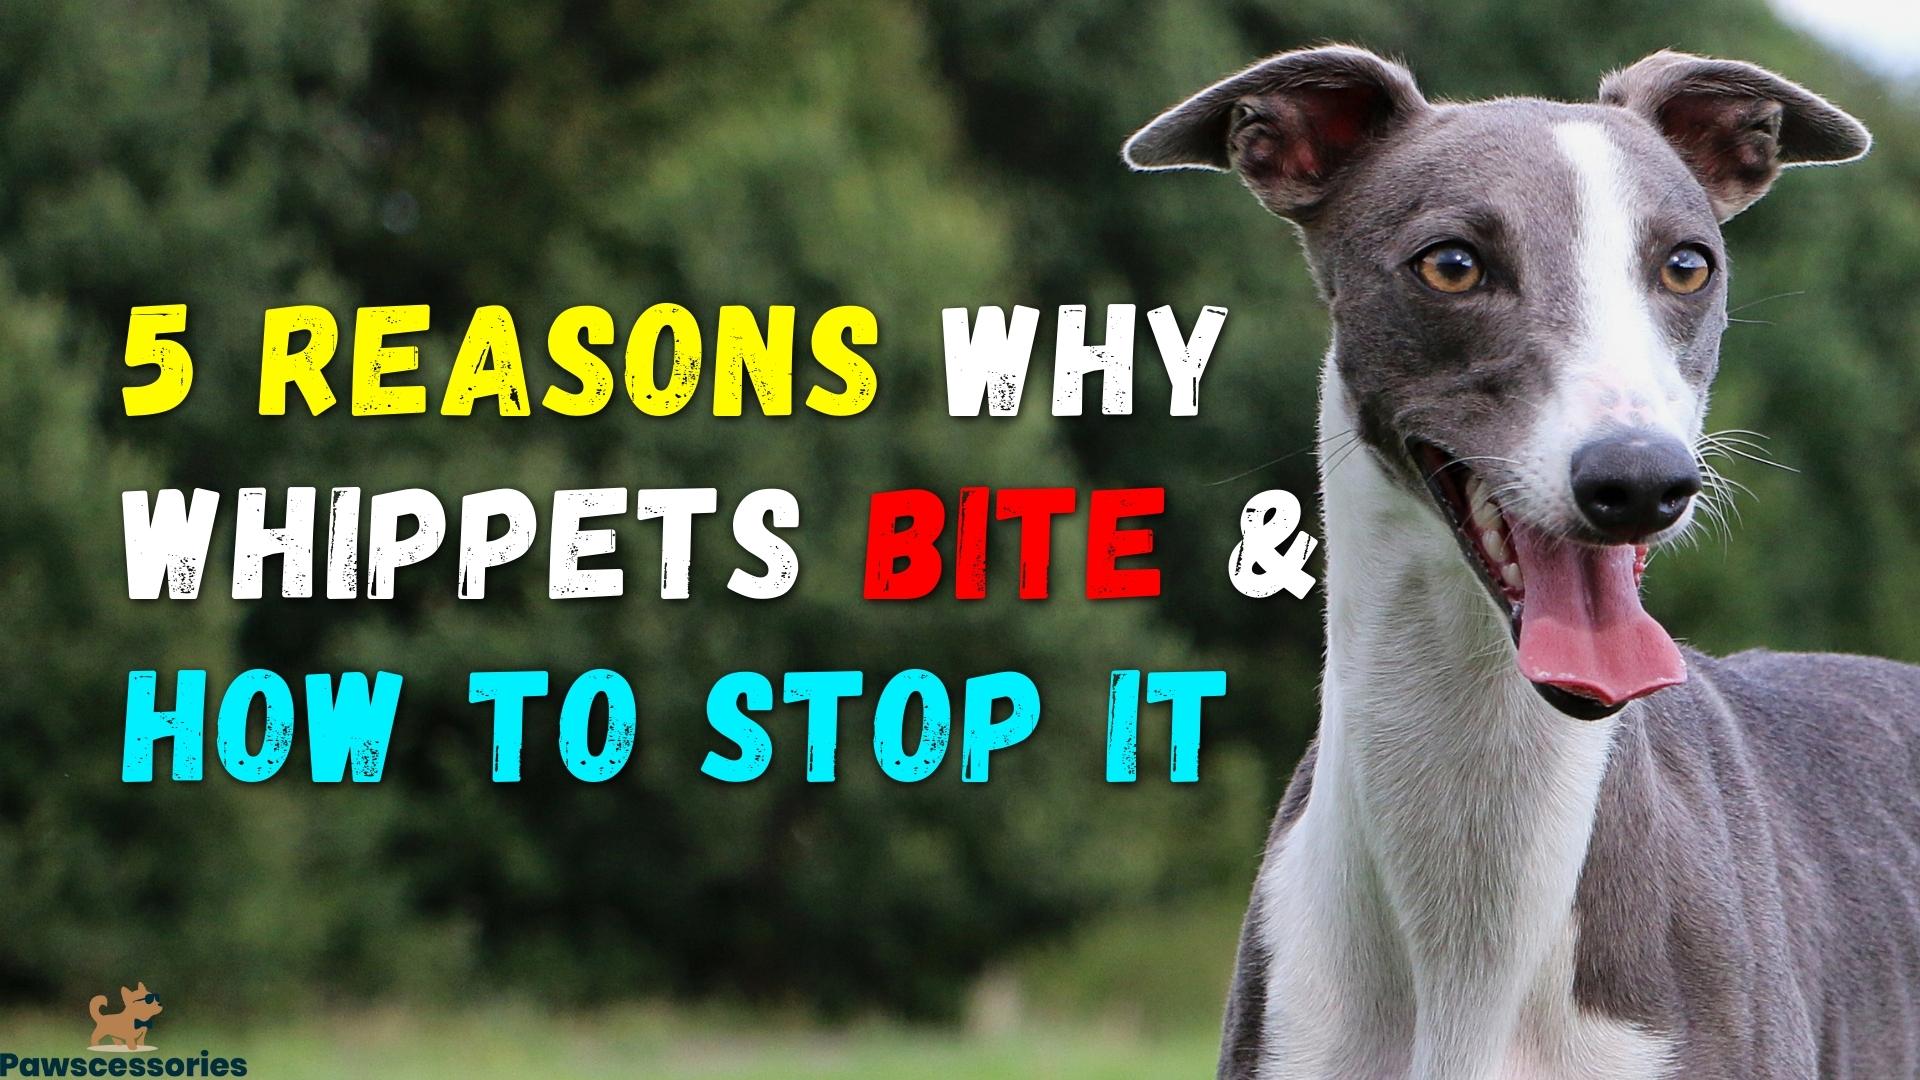 why do whippets bite and how to stop whippet biting